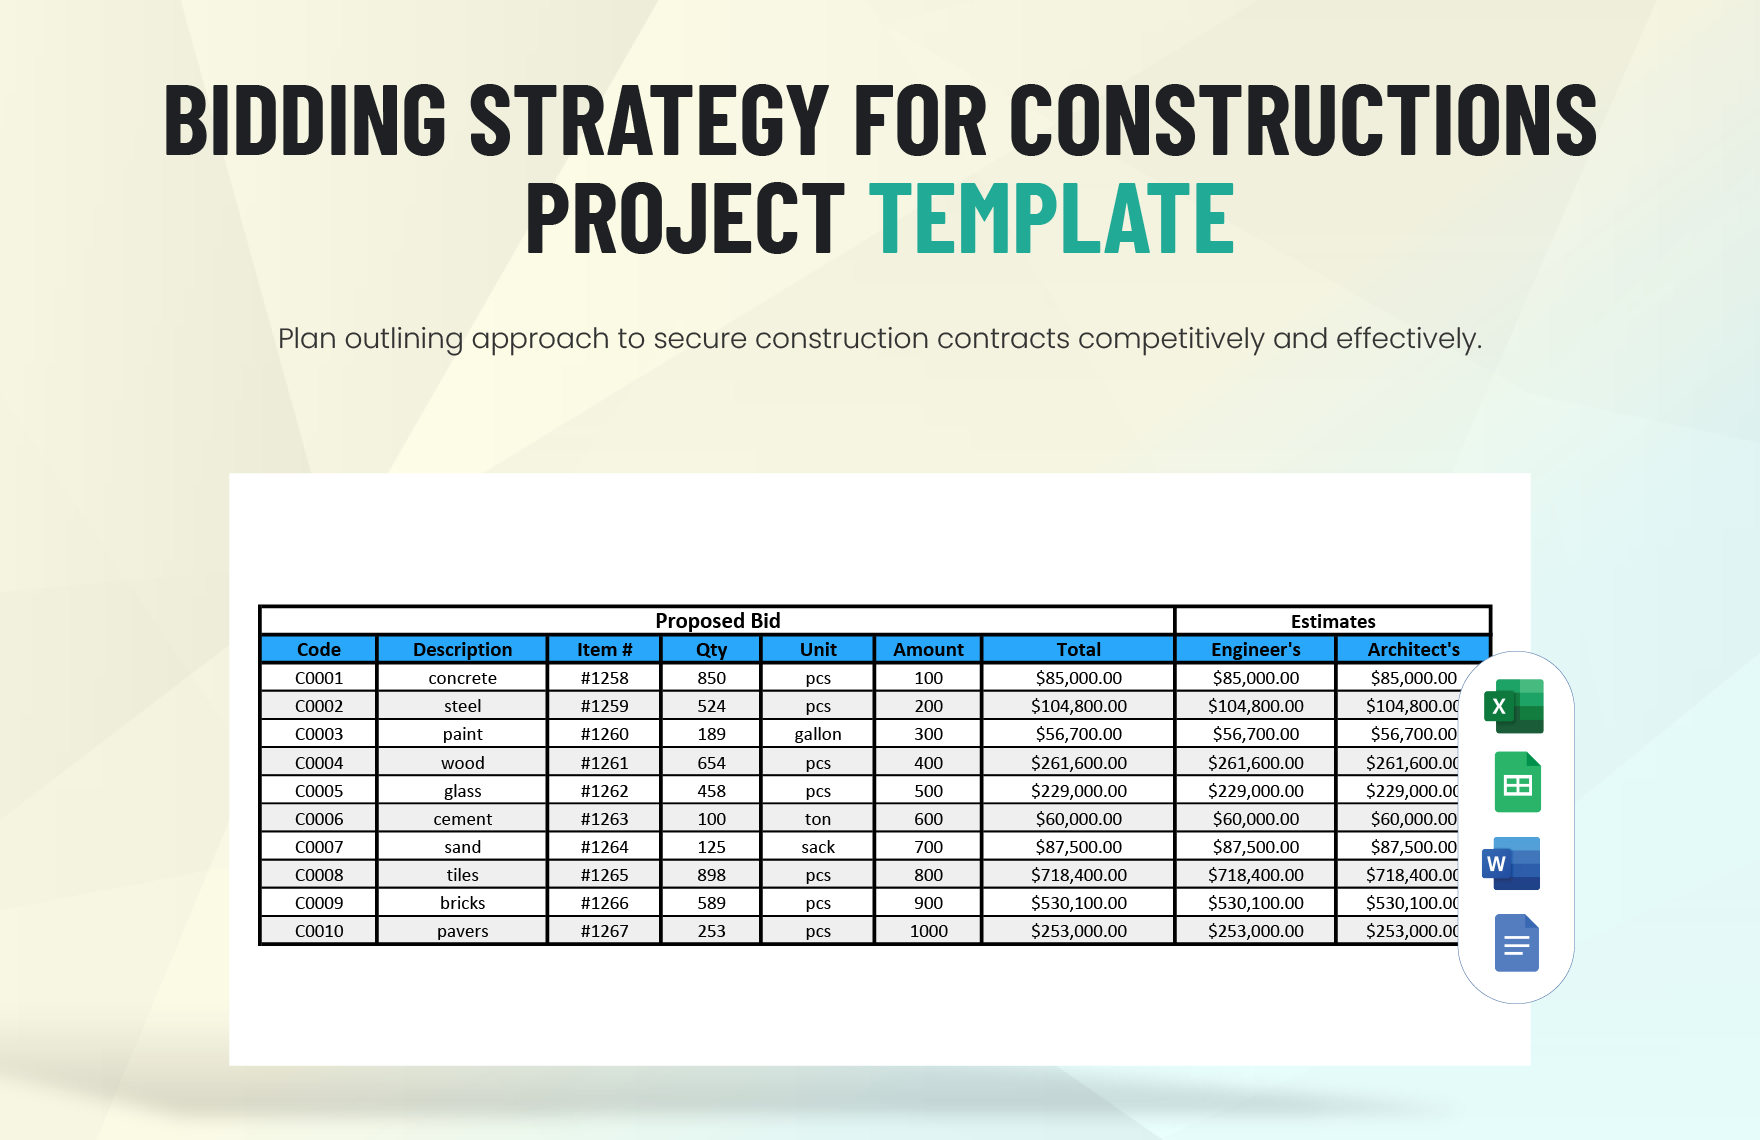 Bidding Strategy for Construction Projects Template